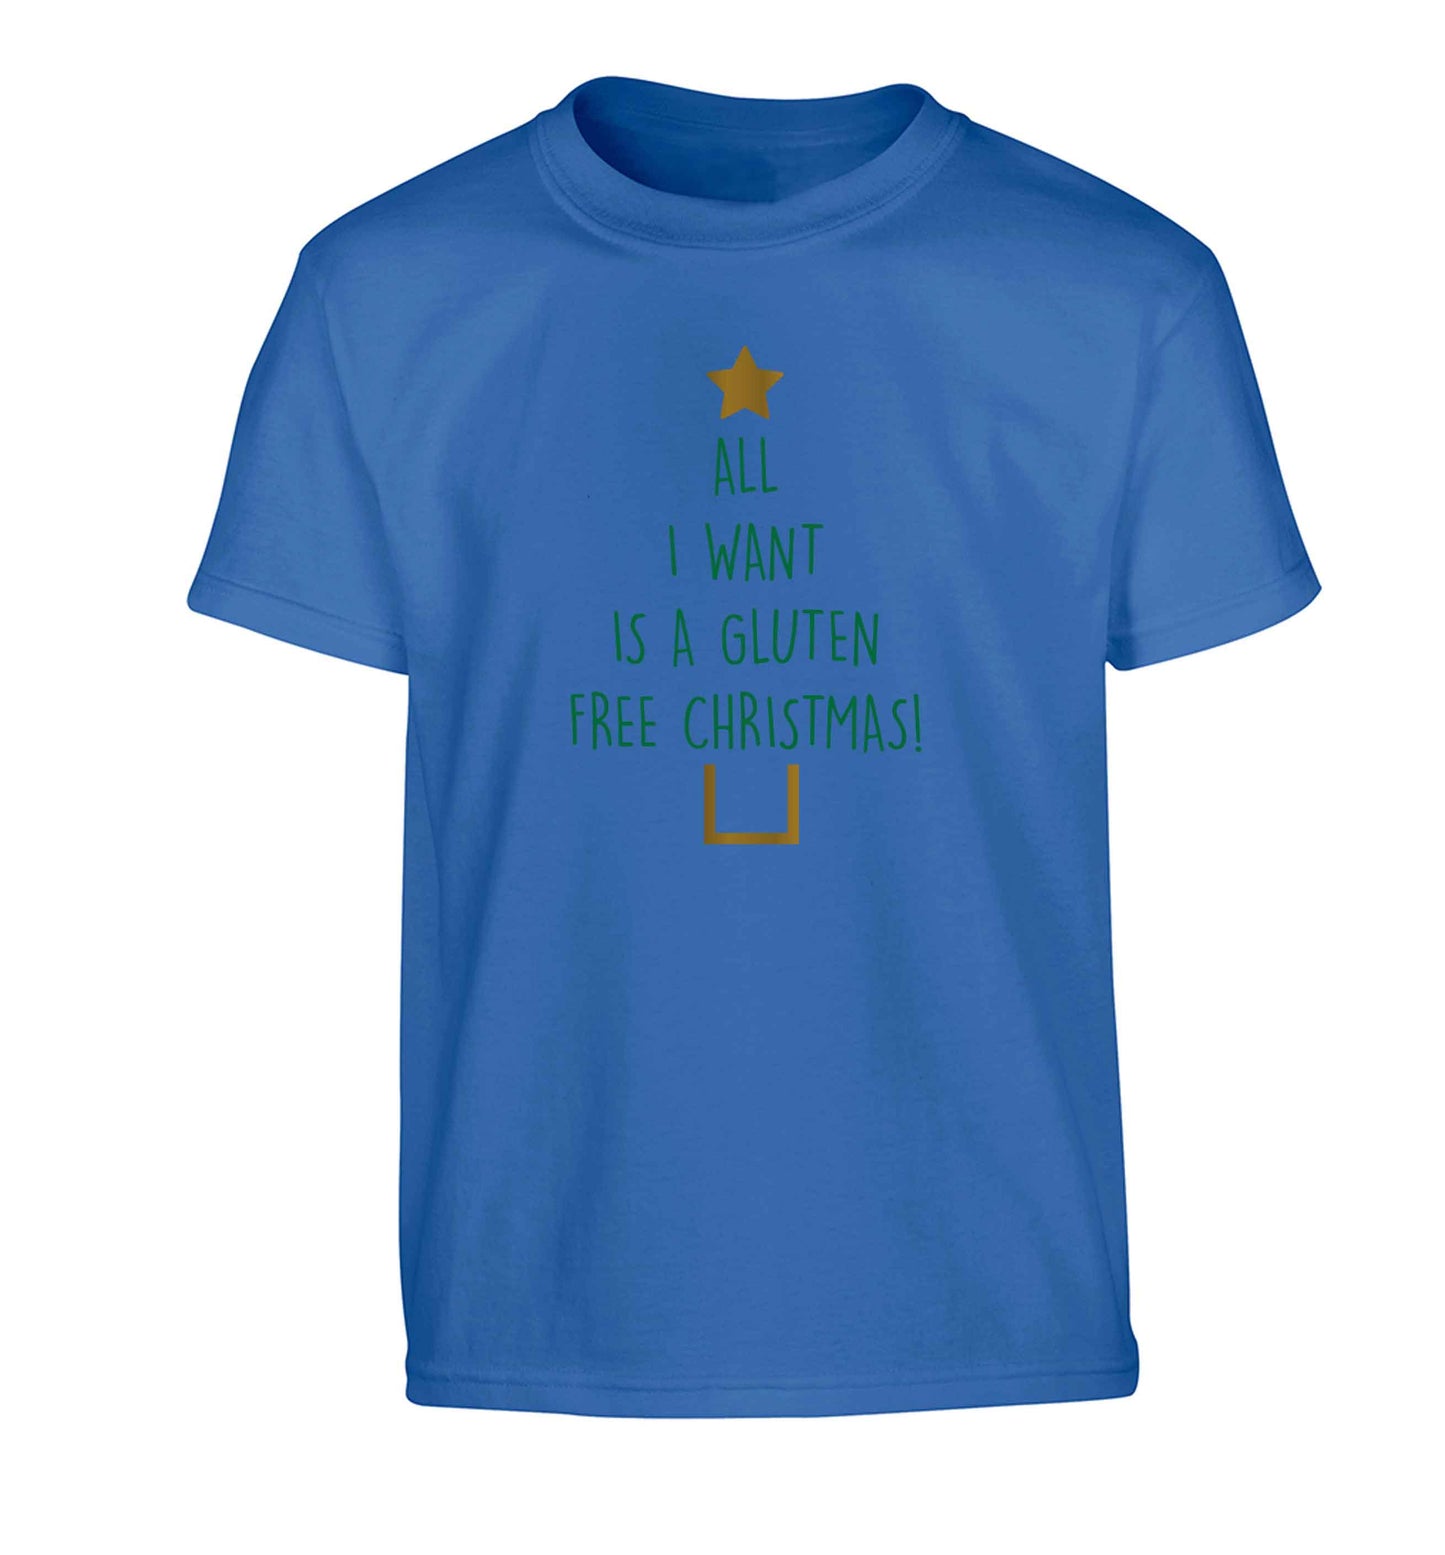 All I want is a gluten free Christmas Children's blue Tshirt 12-13 Years